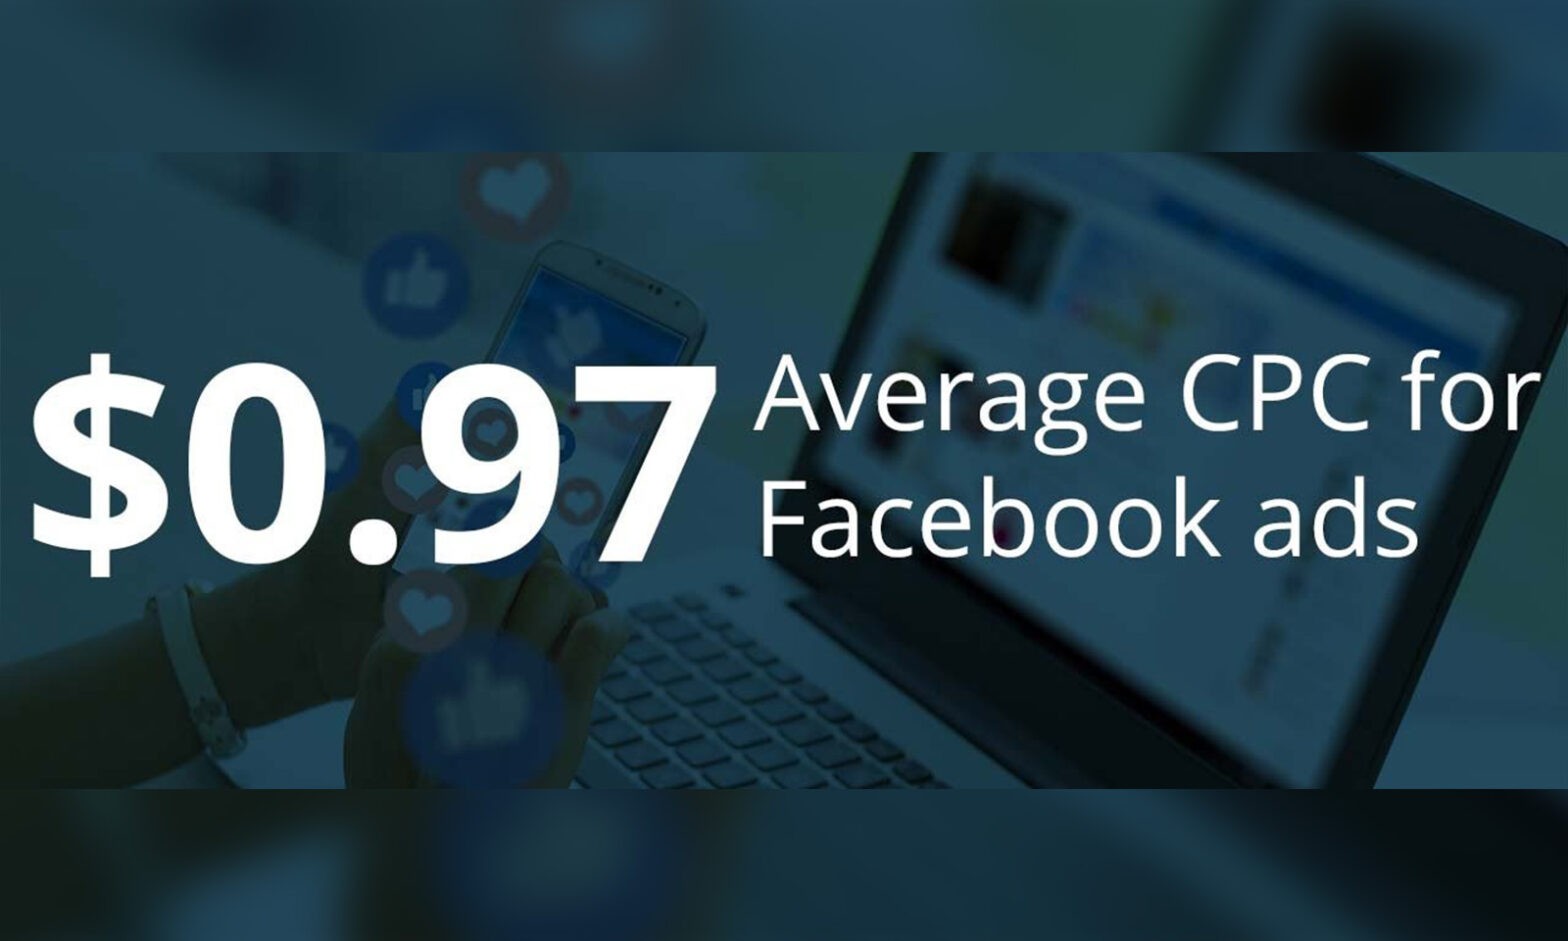 Featured image for post: How Much Does It Cost to Advertise on Facebook?